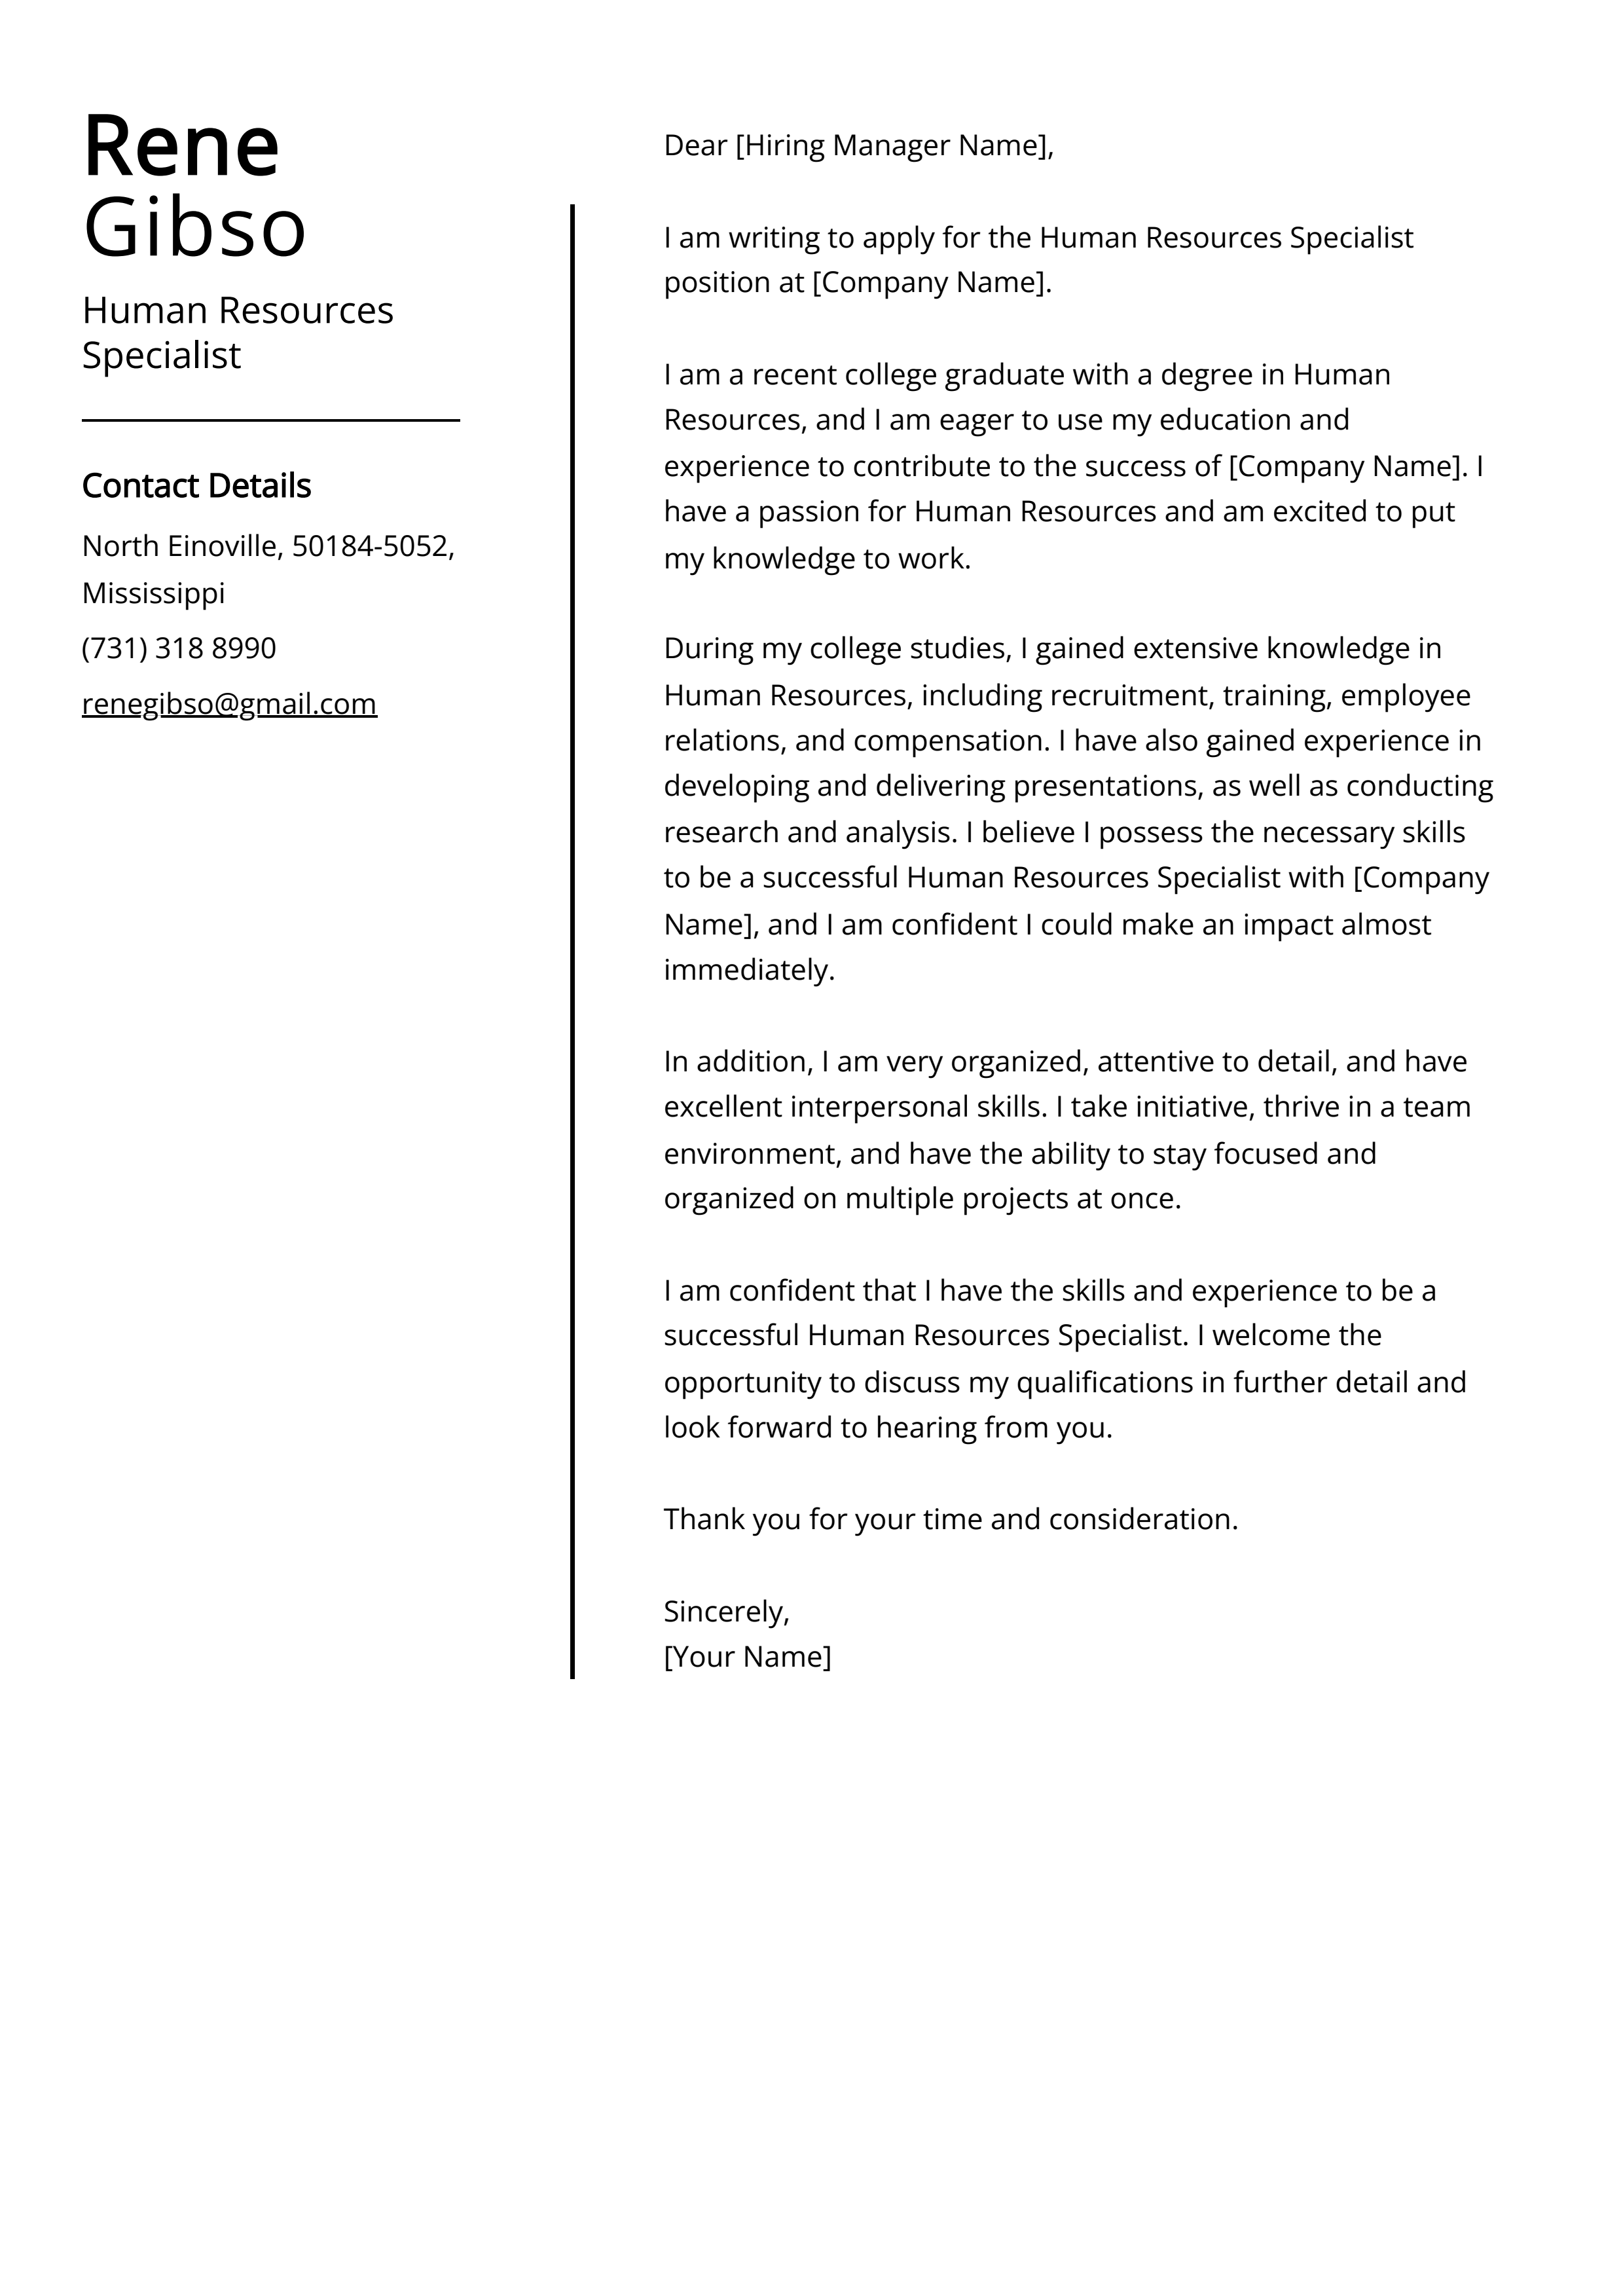 Human Resources Specialist Cover Letter Example